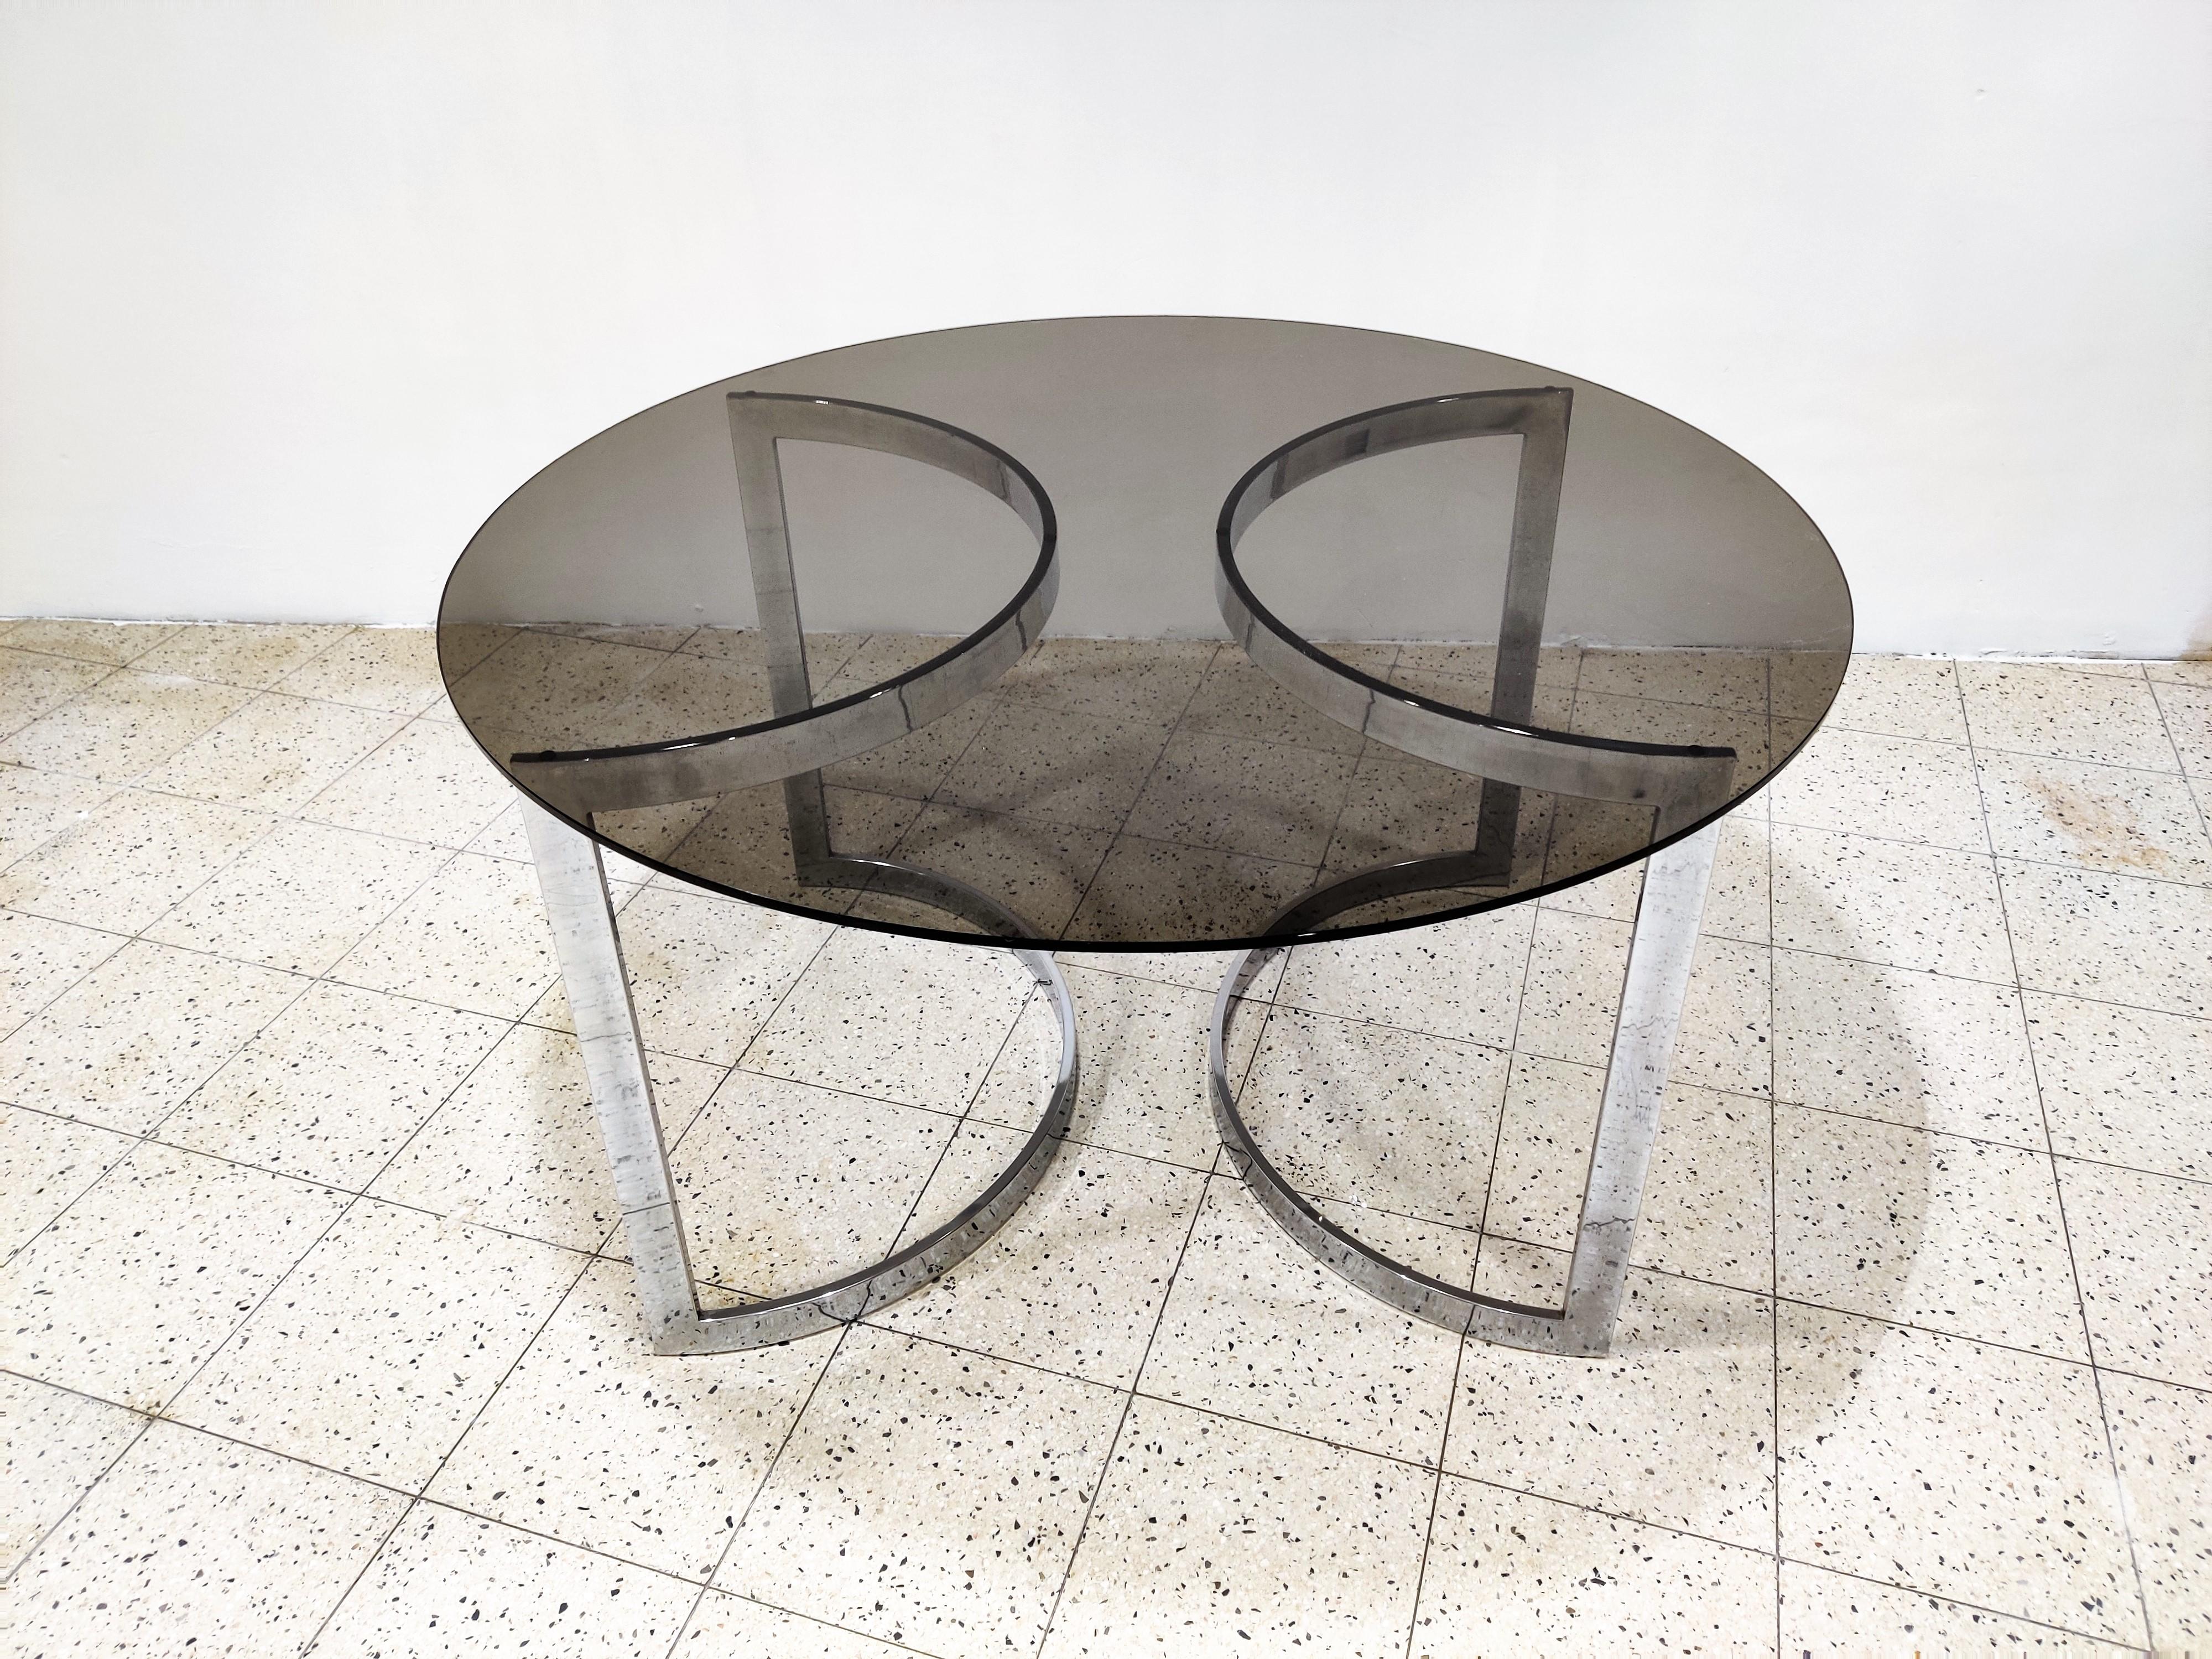 Beautiful Minimalist chromed steel dining table with a round smoked glass top.

The bases can be placed in various ways.

Good condition.

Charming, timeless piece for in the kitchen or dining room.

1970s - France

Measures: Height